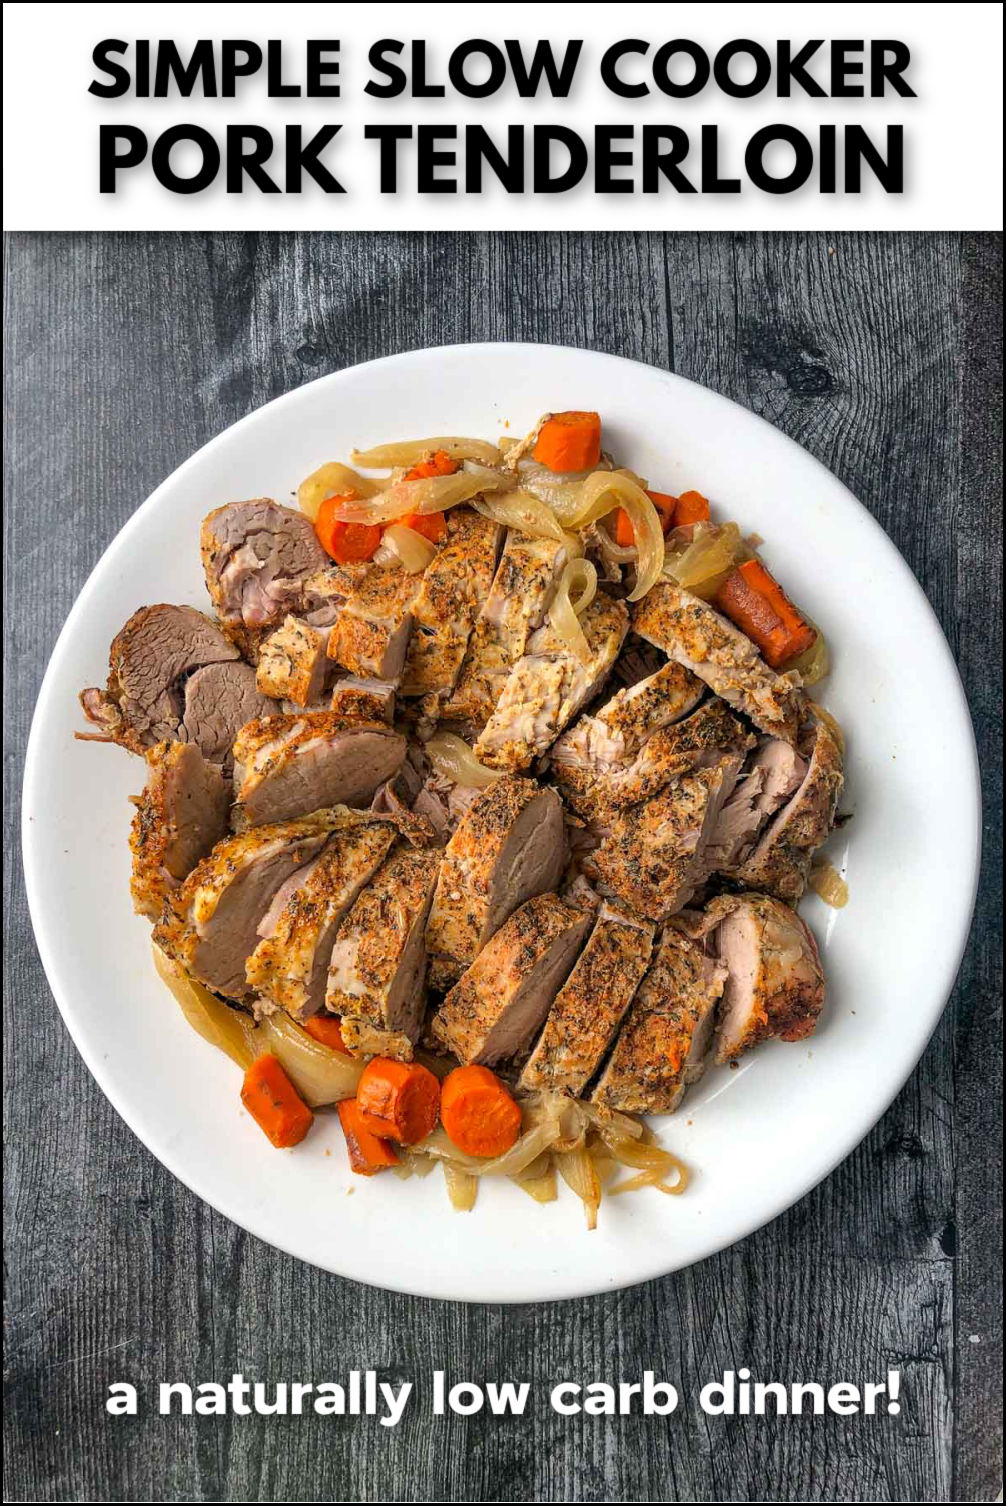 white platter with sliced pork tenderloin and roasted veggies made in slow cooker and text